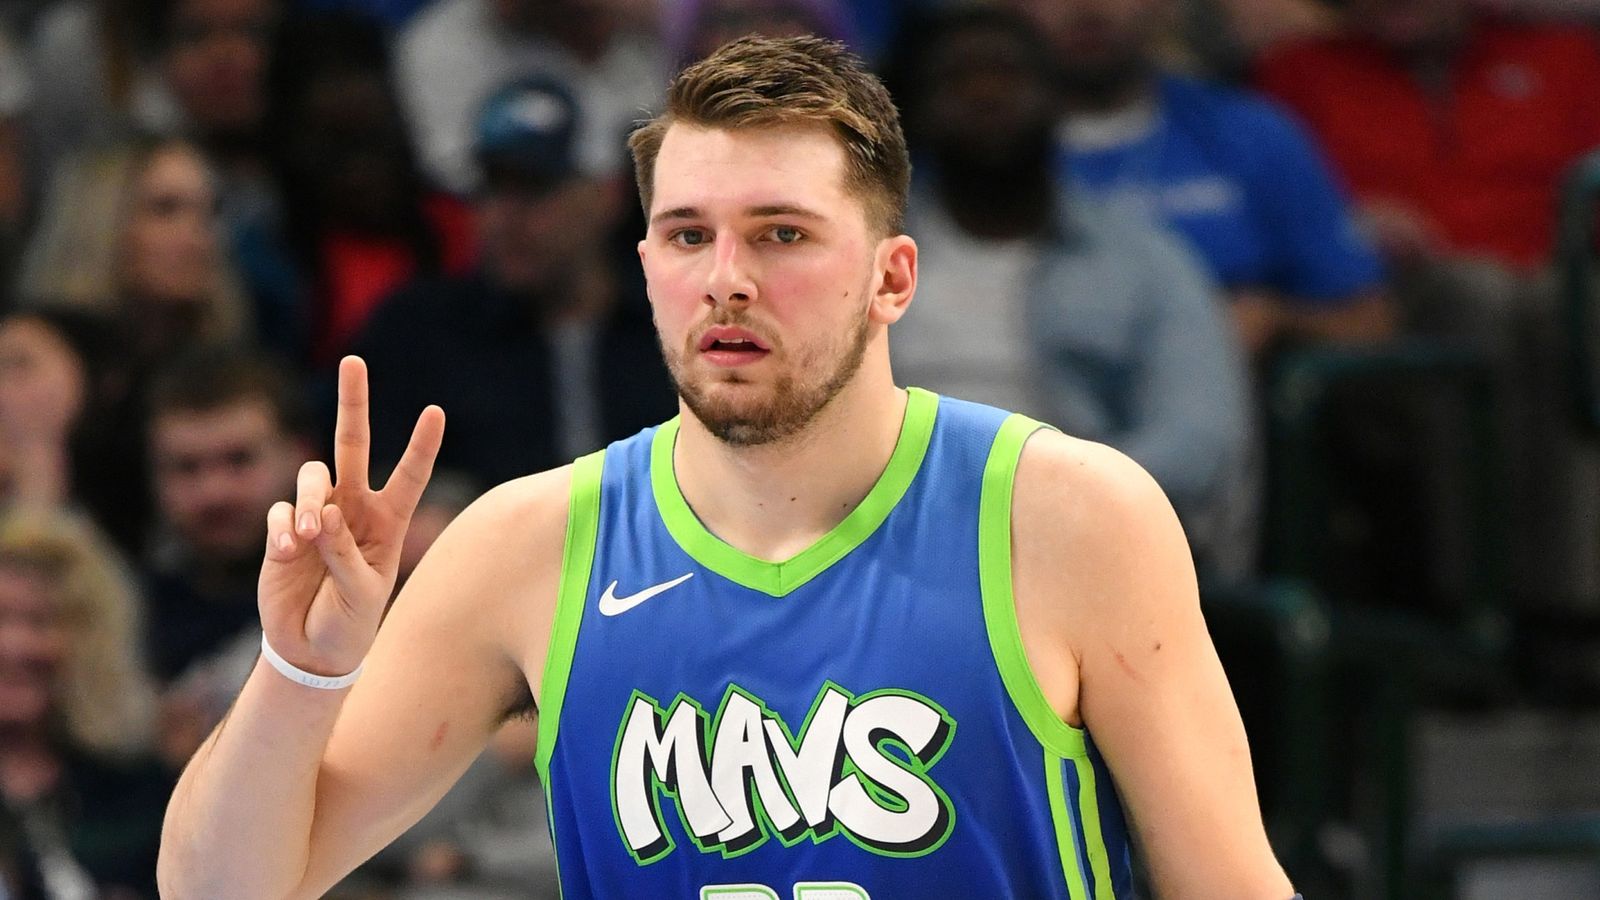 Mavericks: Kyrie Irving, Luka Doncic fail to score in final seconds